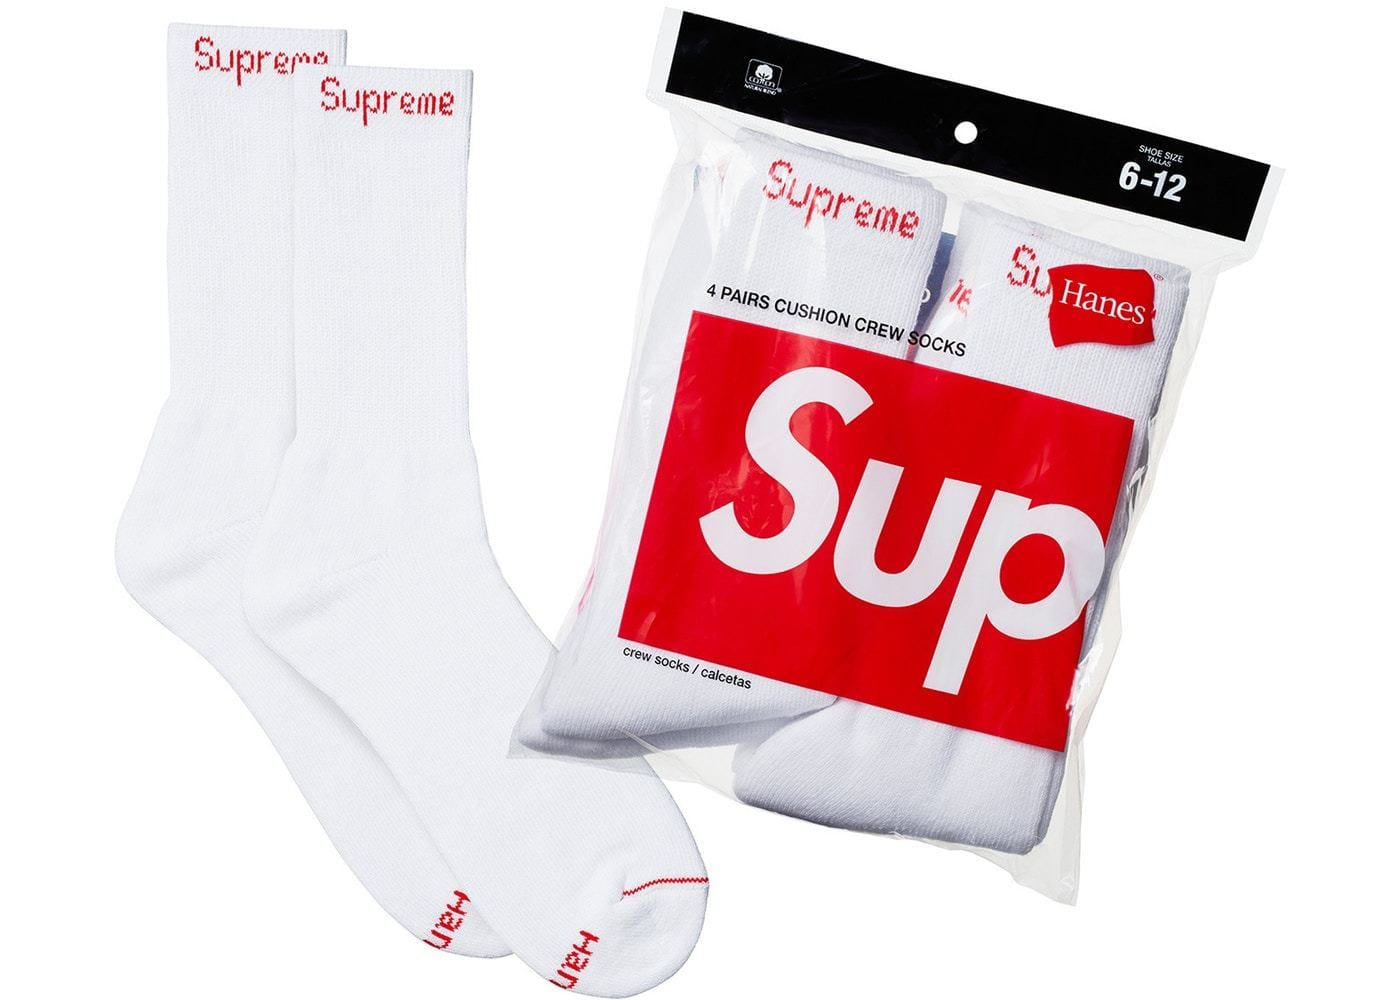 SUPREME ACCESSORIES Expedited - 3-7 Business Days